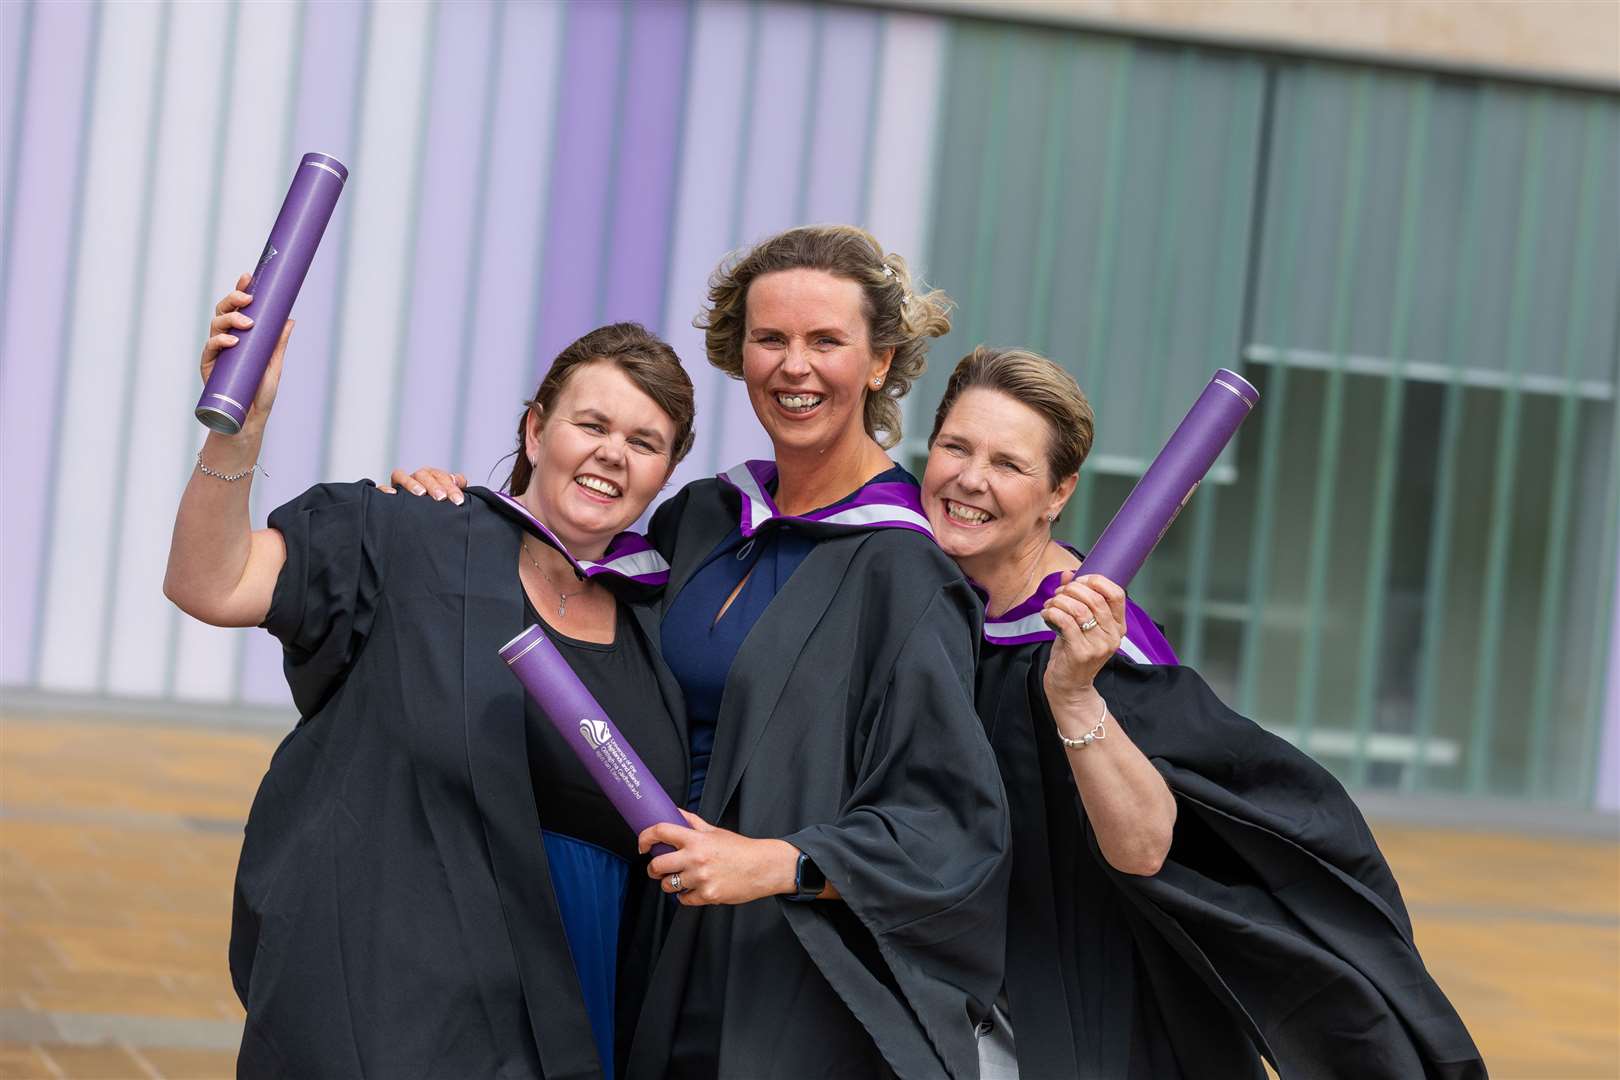 BA Childhood Practice graduates Gillian Morrison of Inverness, Cat Mackenzie from Kirkhill and Margaret Smith of Nairn.